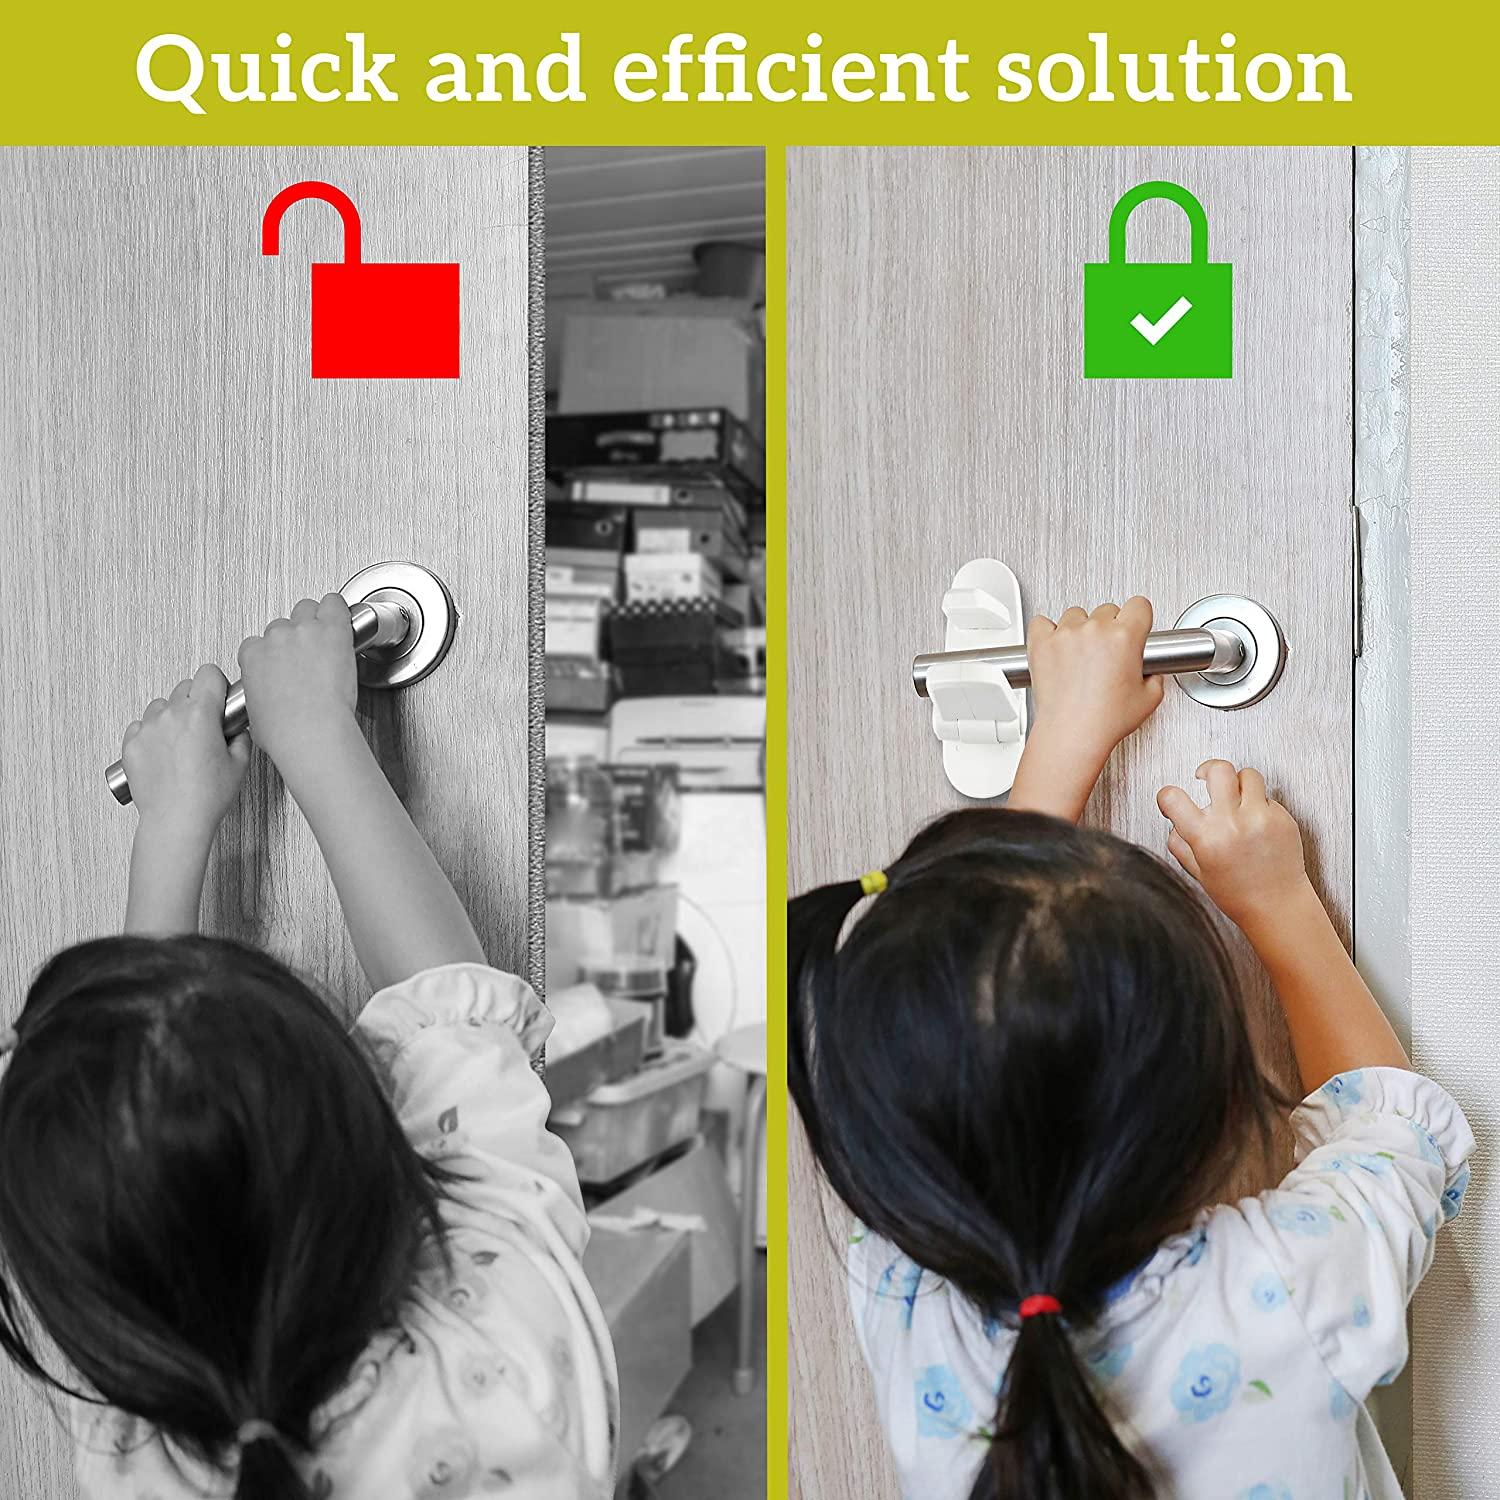 Child proof Door Lever Lock (2 Pack) Child Proof Doors & Handles with 3M  Adhesive - Child Safety. Prevents Toddlers from Opening Doors 